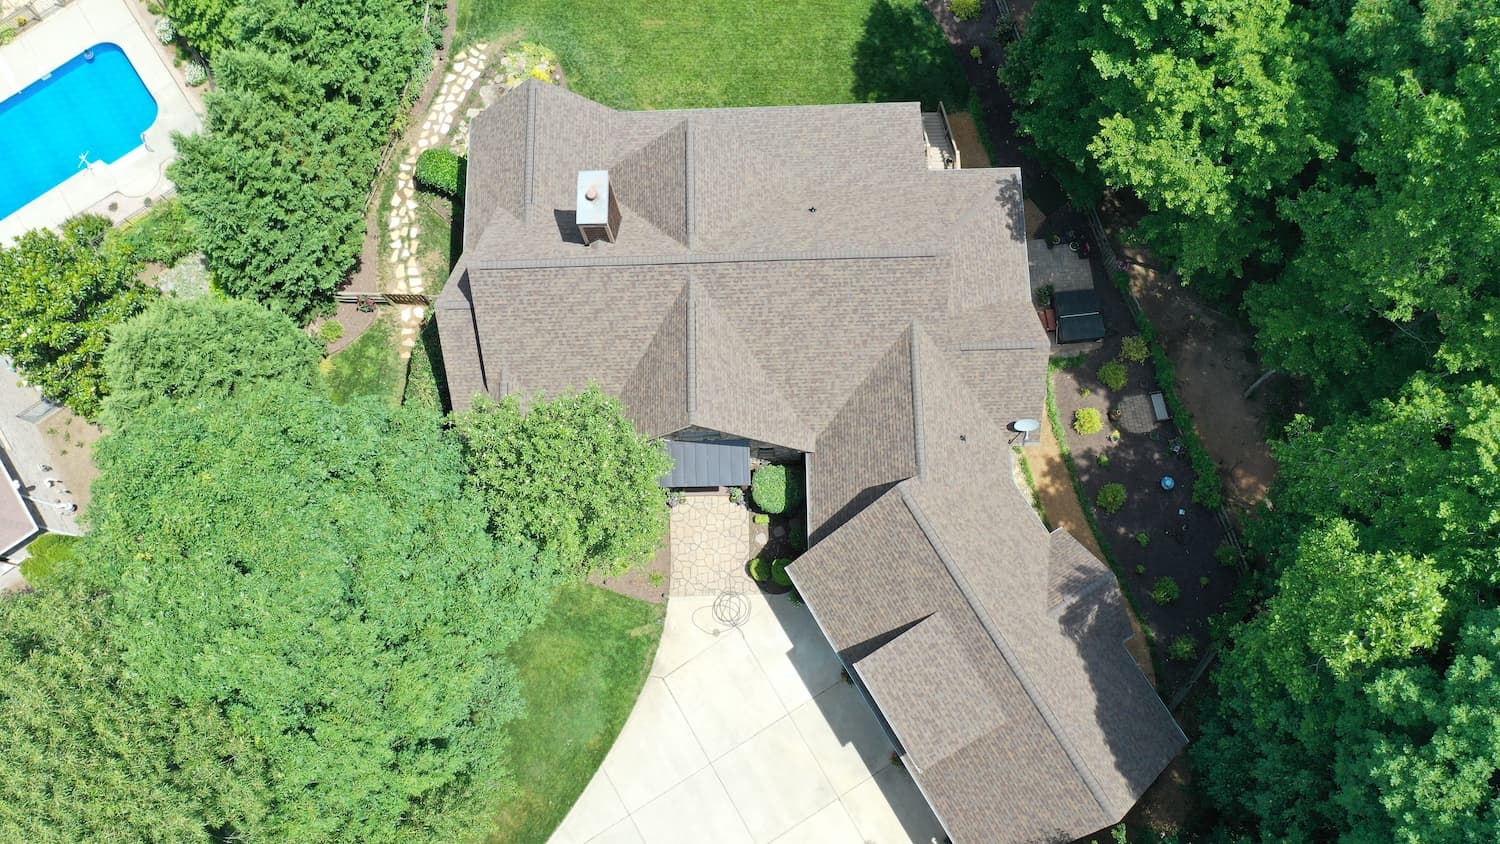 http://top%20aerial%20view%20of%20trudefinition%20duration%20teak%20shingles%20on%20residential%20home